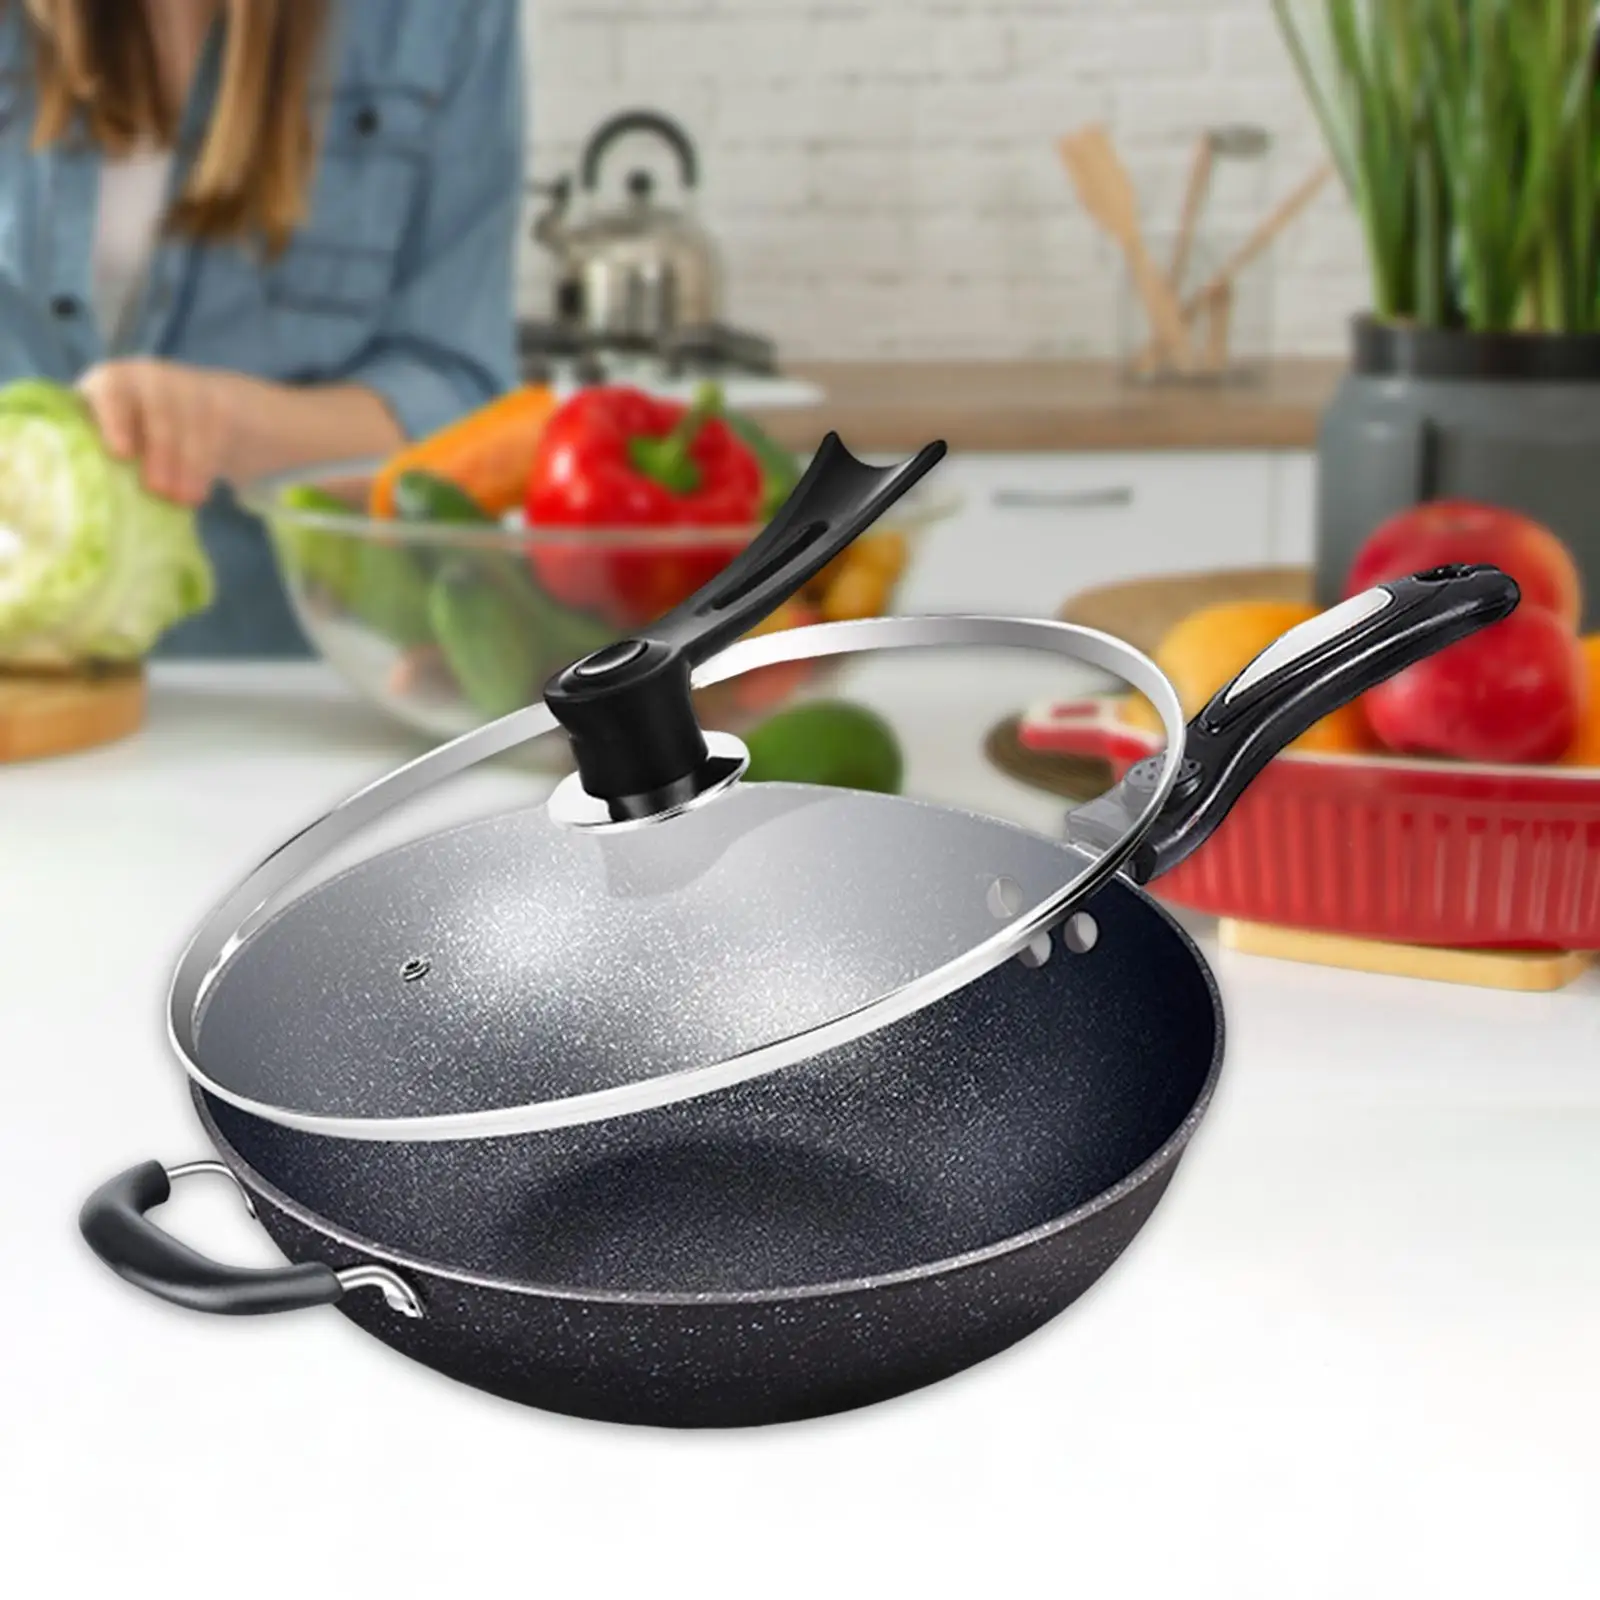 Wok Pan with Lids Saute wok Pan Nonstick No Coated Cooking Wok Nonstick Woks Stirfry Pans for Meat Toast Cheese Cake Omelets